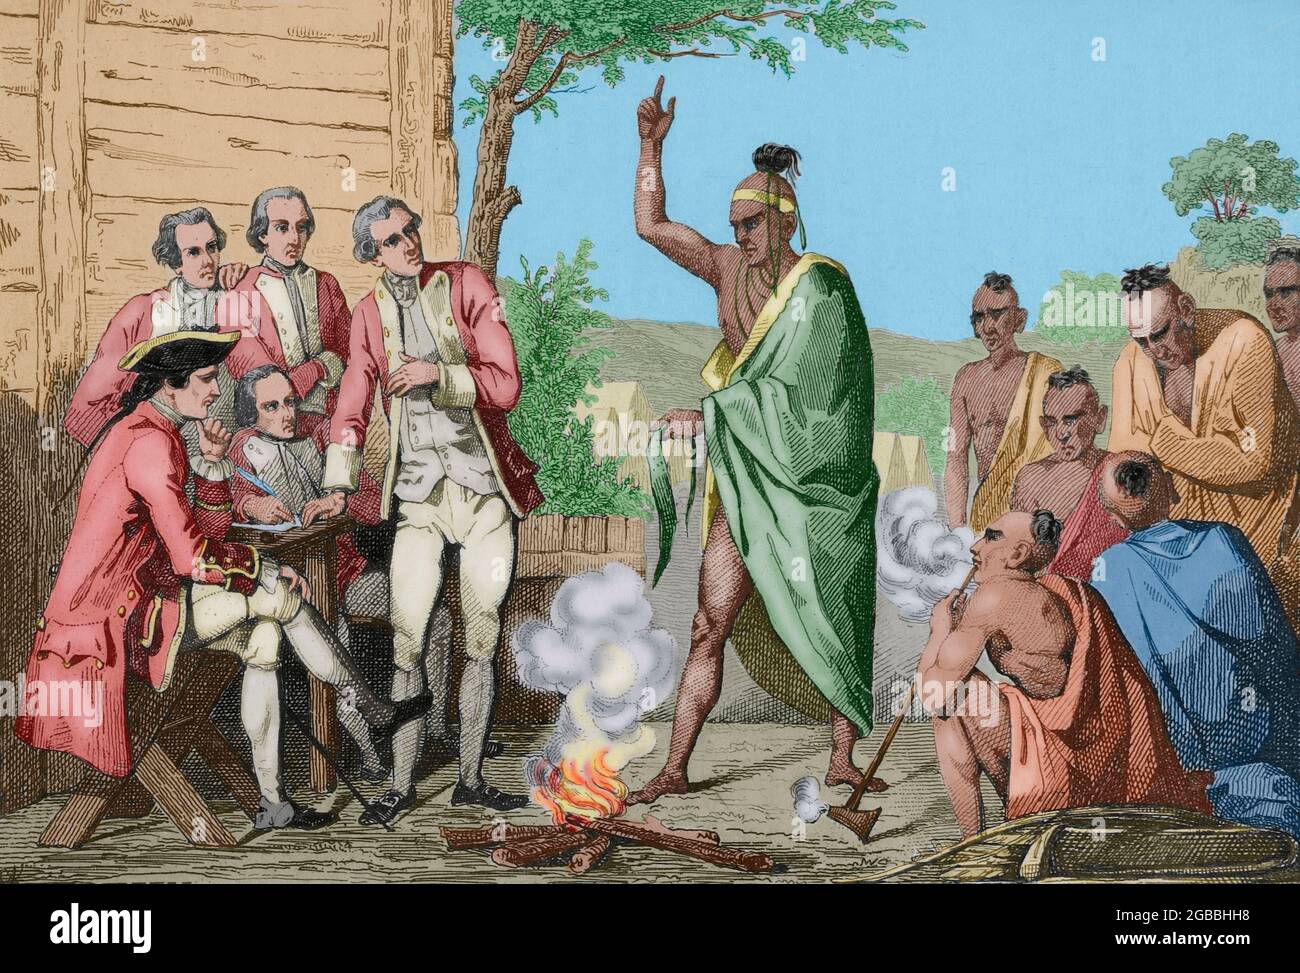 History of the United States of America. Native American council and conquistadors meeting around a fire. Engraving by Vernier. Panorama Universal. History of the United States of America, from 1st edition of Jean B.G. Roux de Rochelle's Etats-Unis d'Amérique in 1837. Spanish edition, printed in Barcelona, 1850. Later colouration. Stock Photo